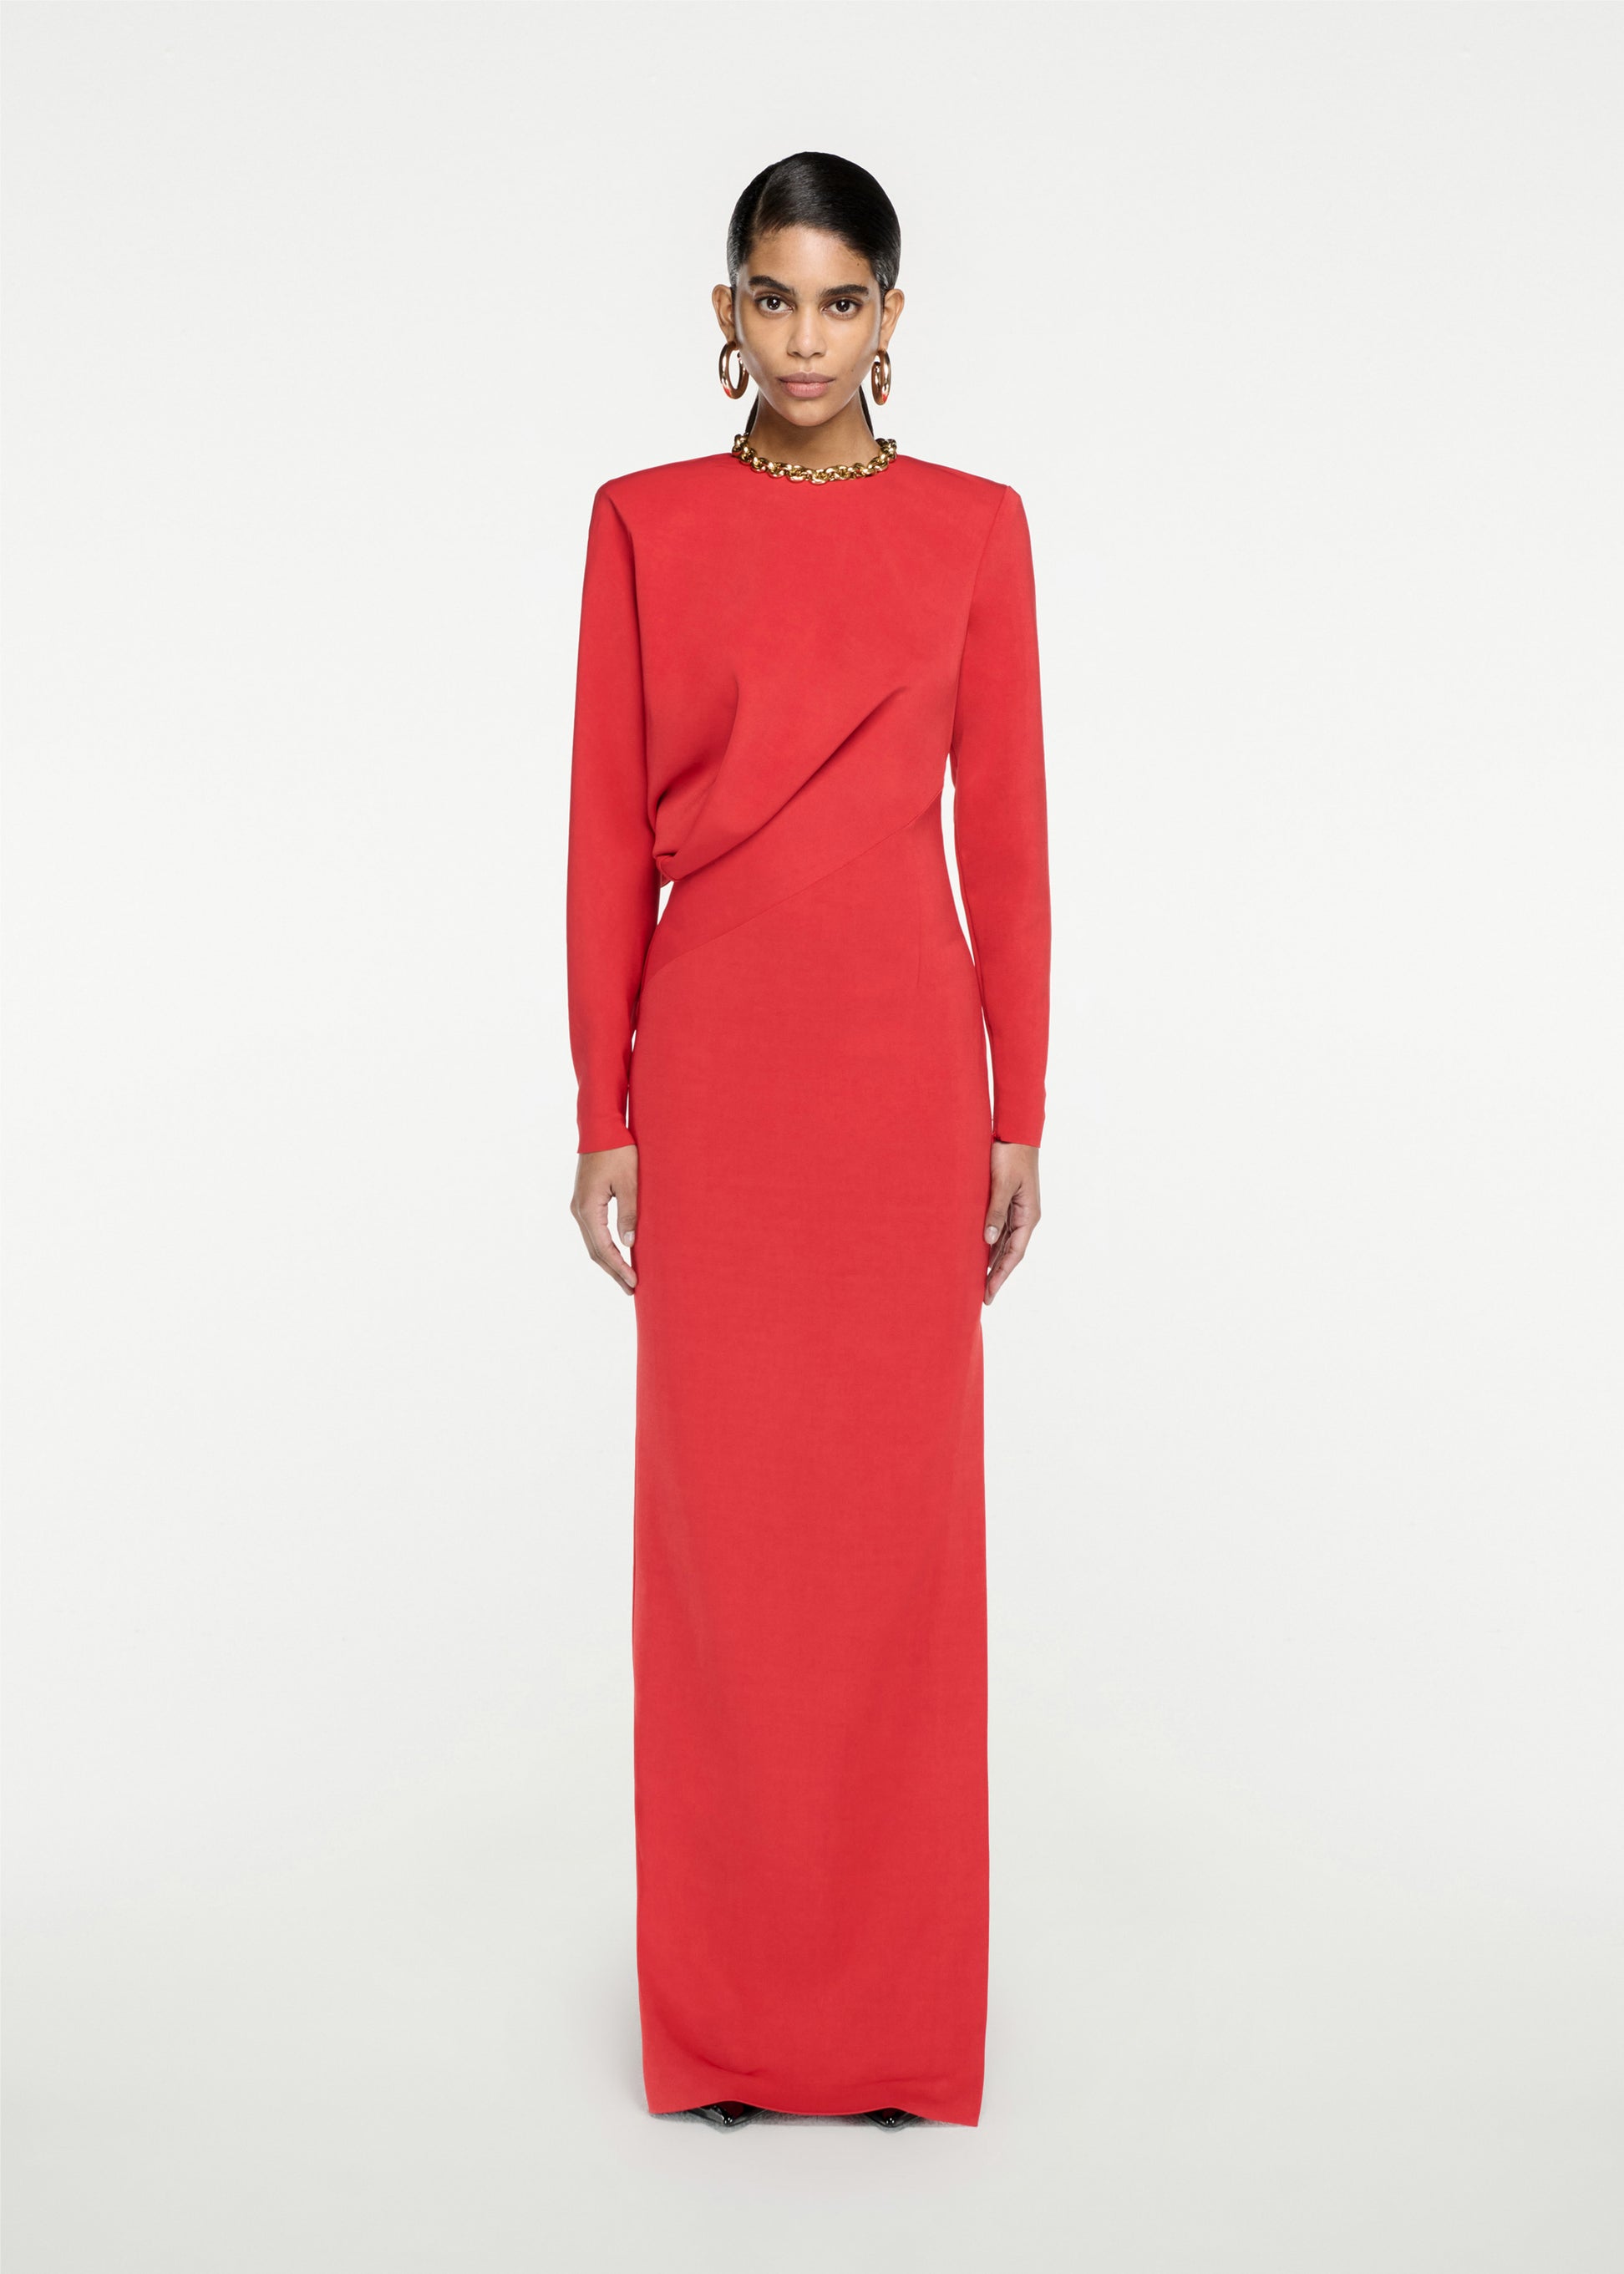 Woman wearing the Long Sleeve Stretch Cady Maxi Dress in Red